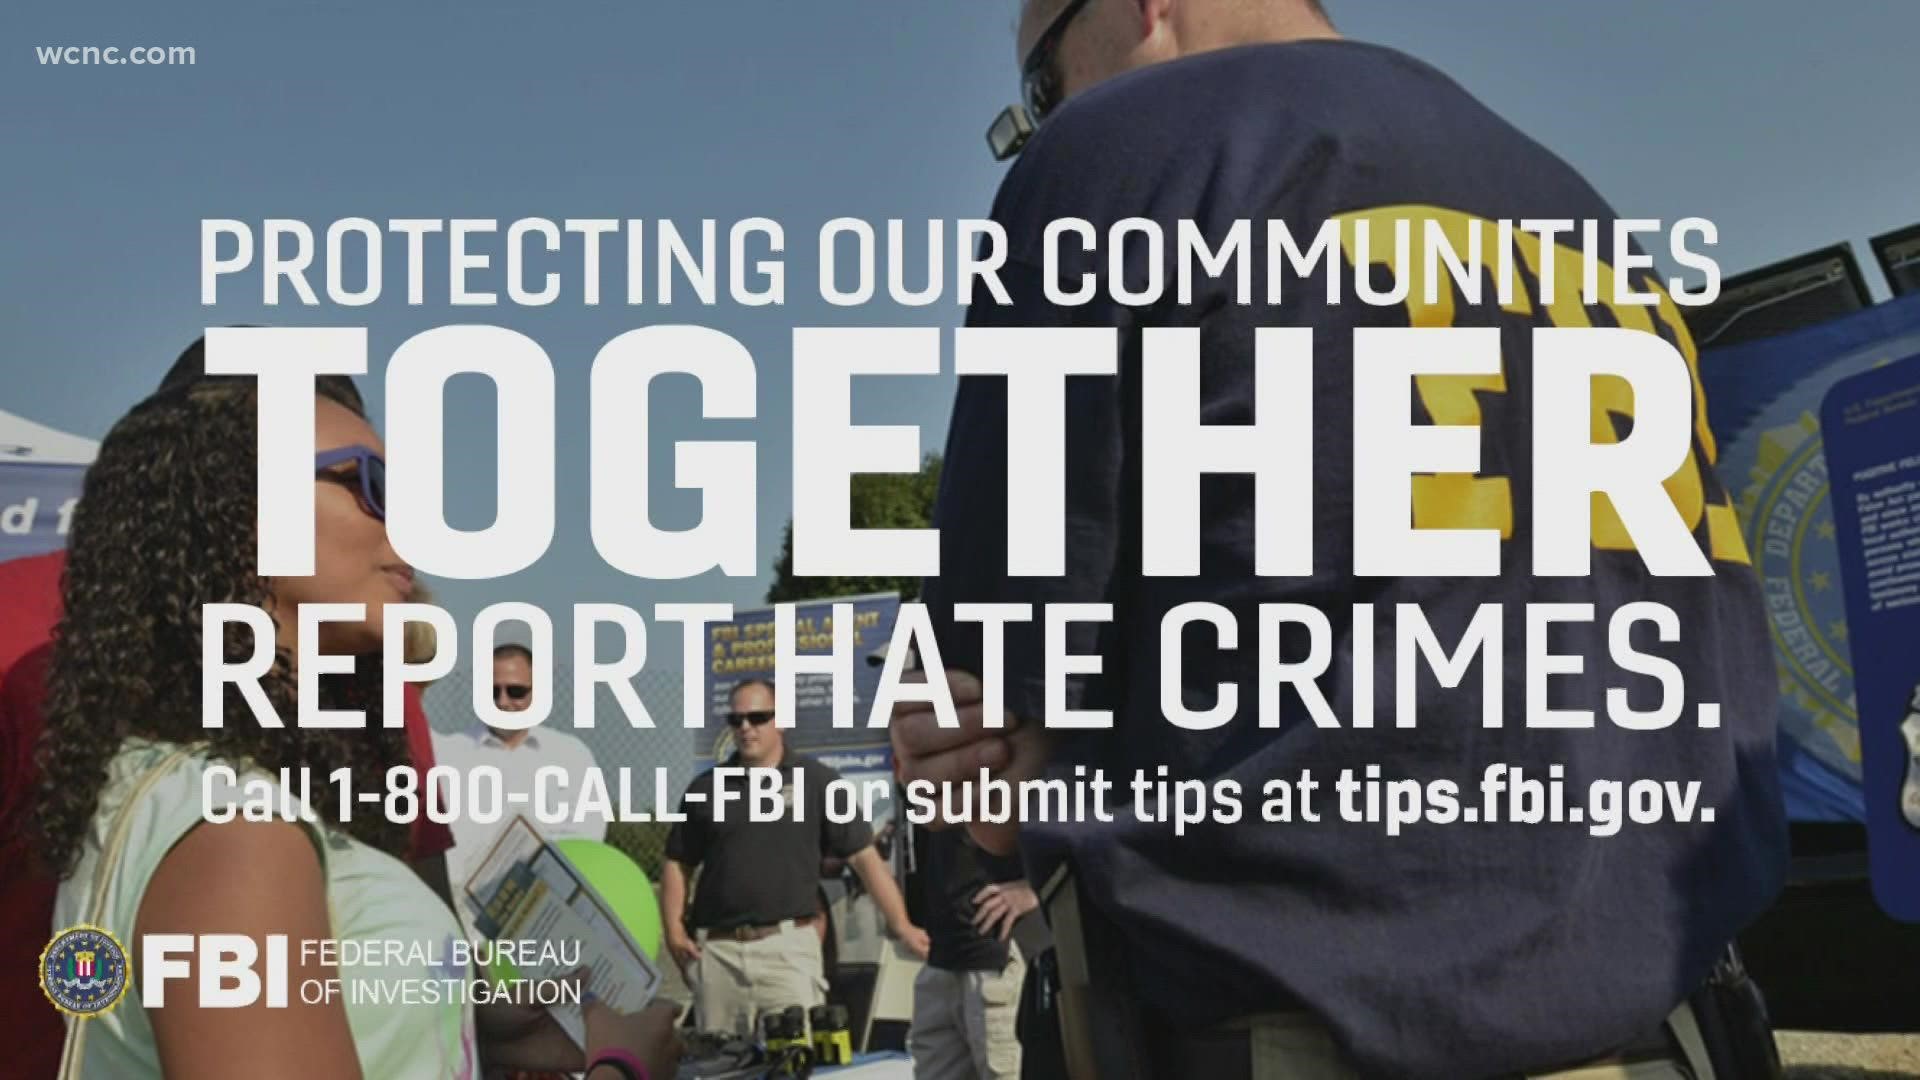 The goal is to have the public successfully recognize and report a hate crime when they see it.